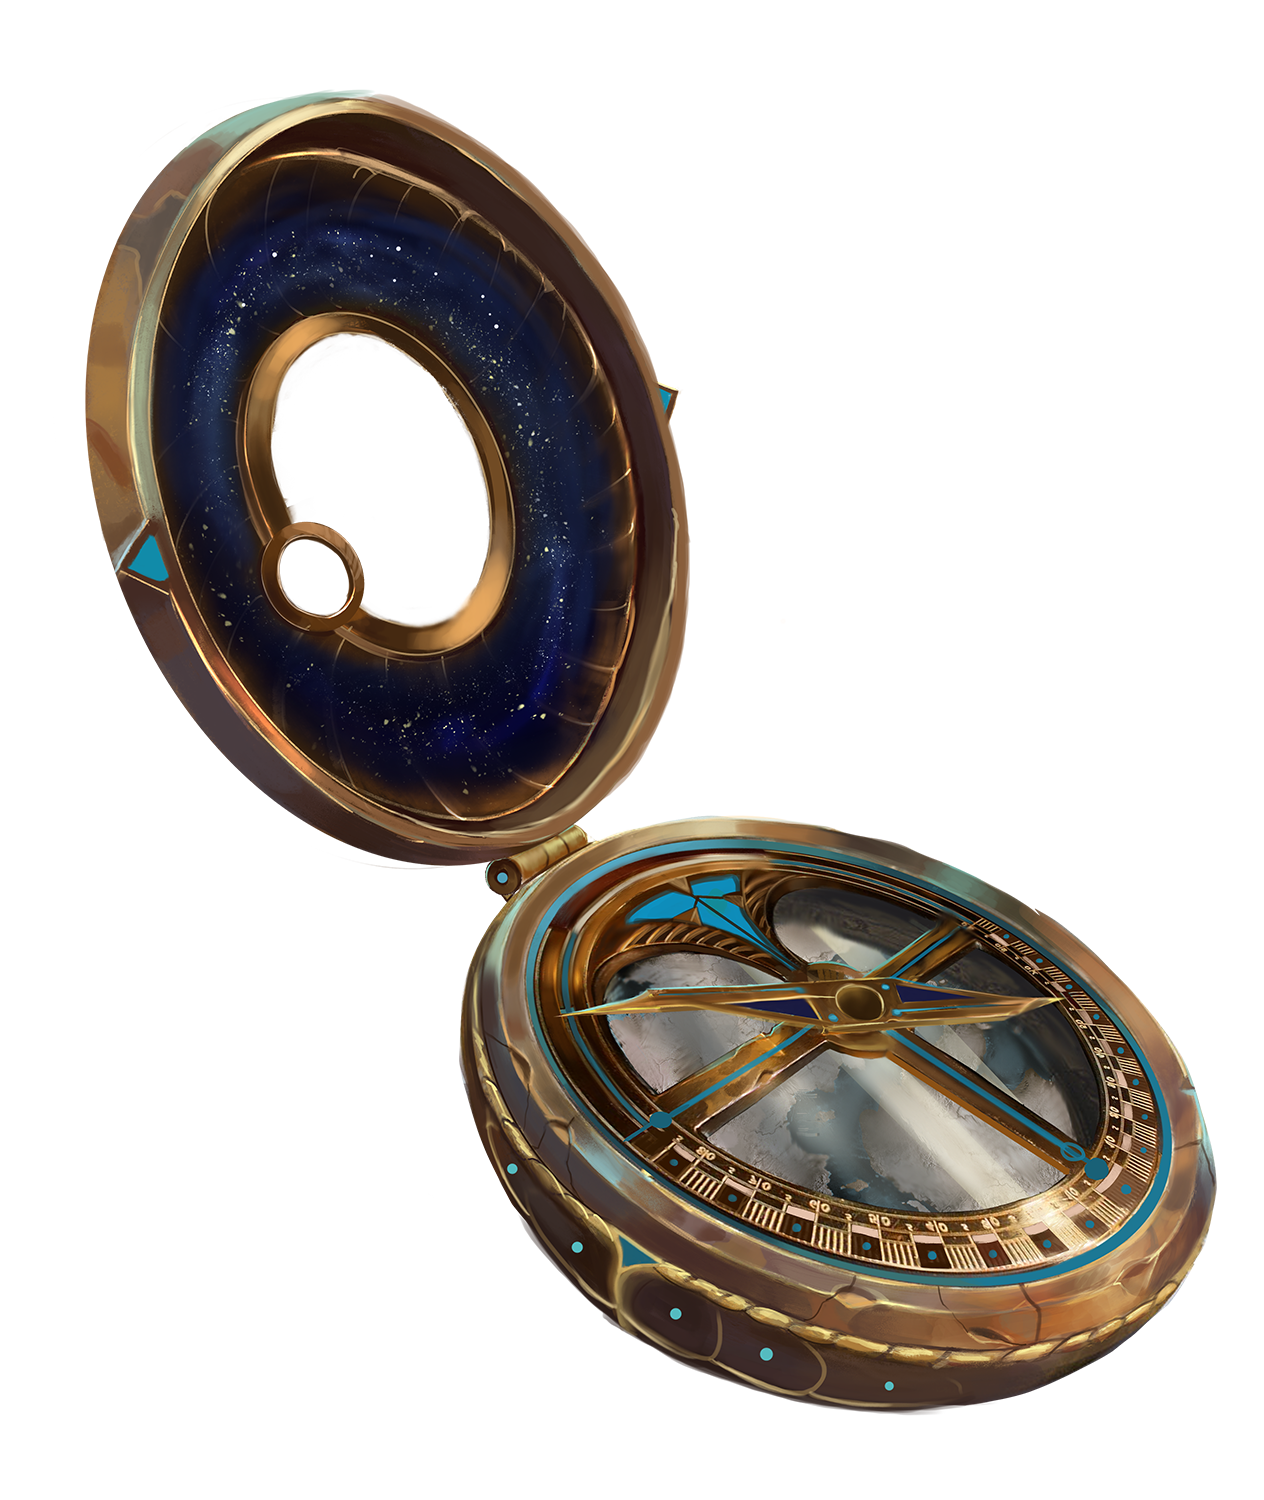 An illustration of a wayfinder, a magical compass with slots for aeon stones.